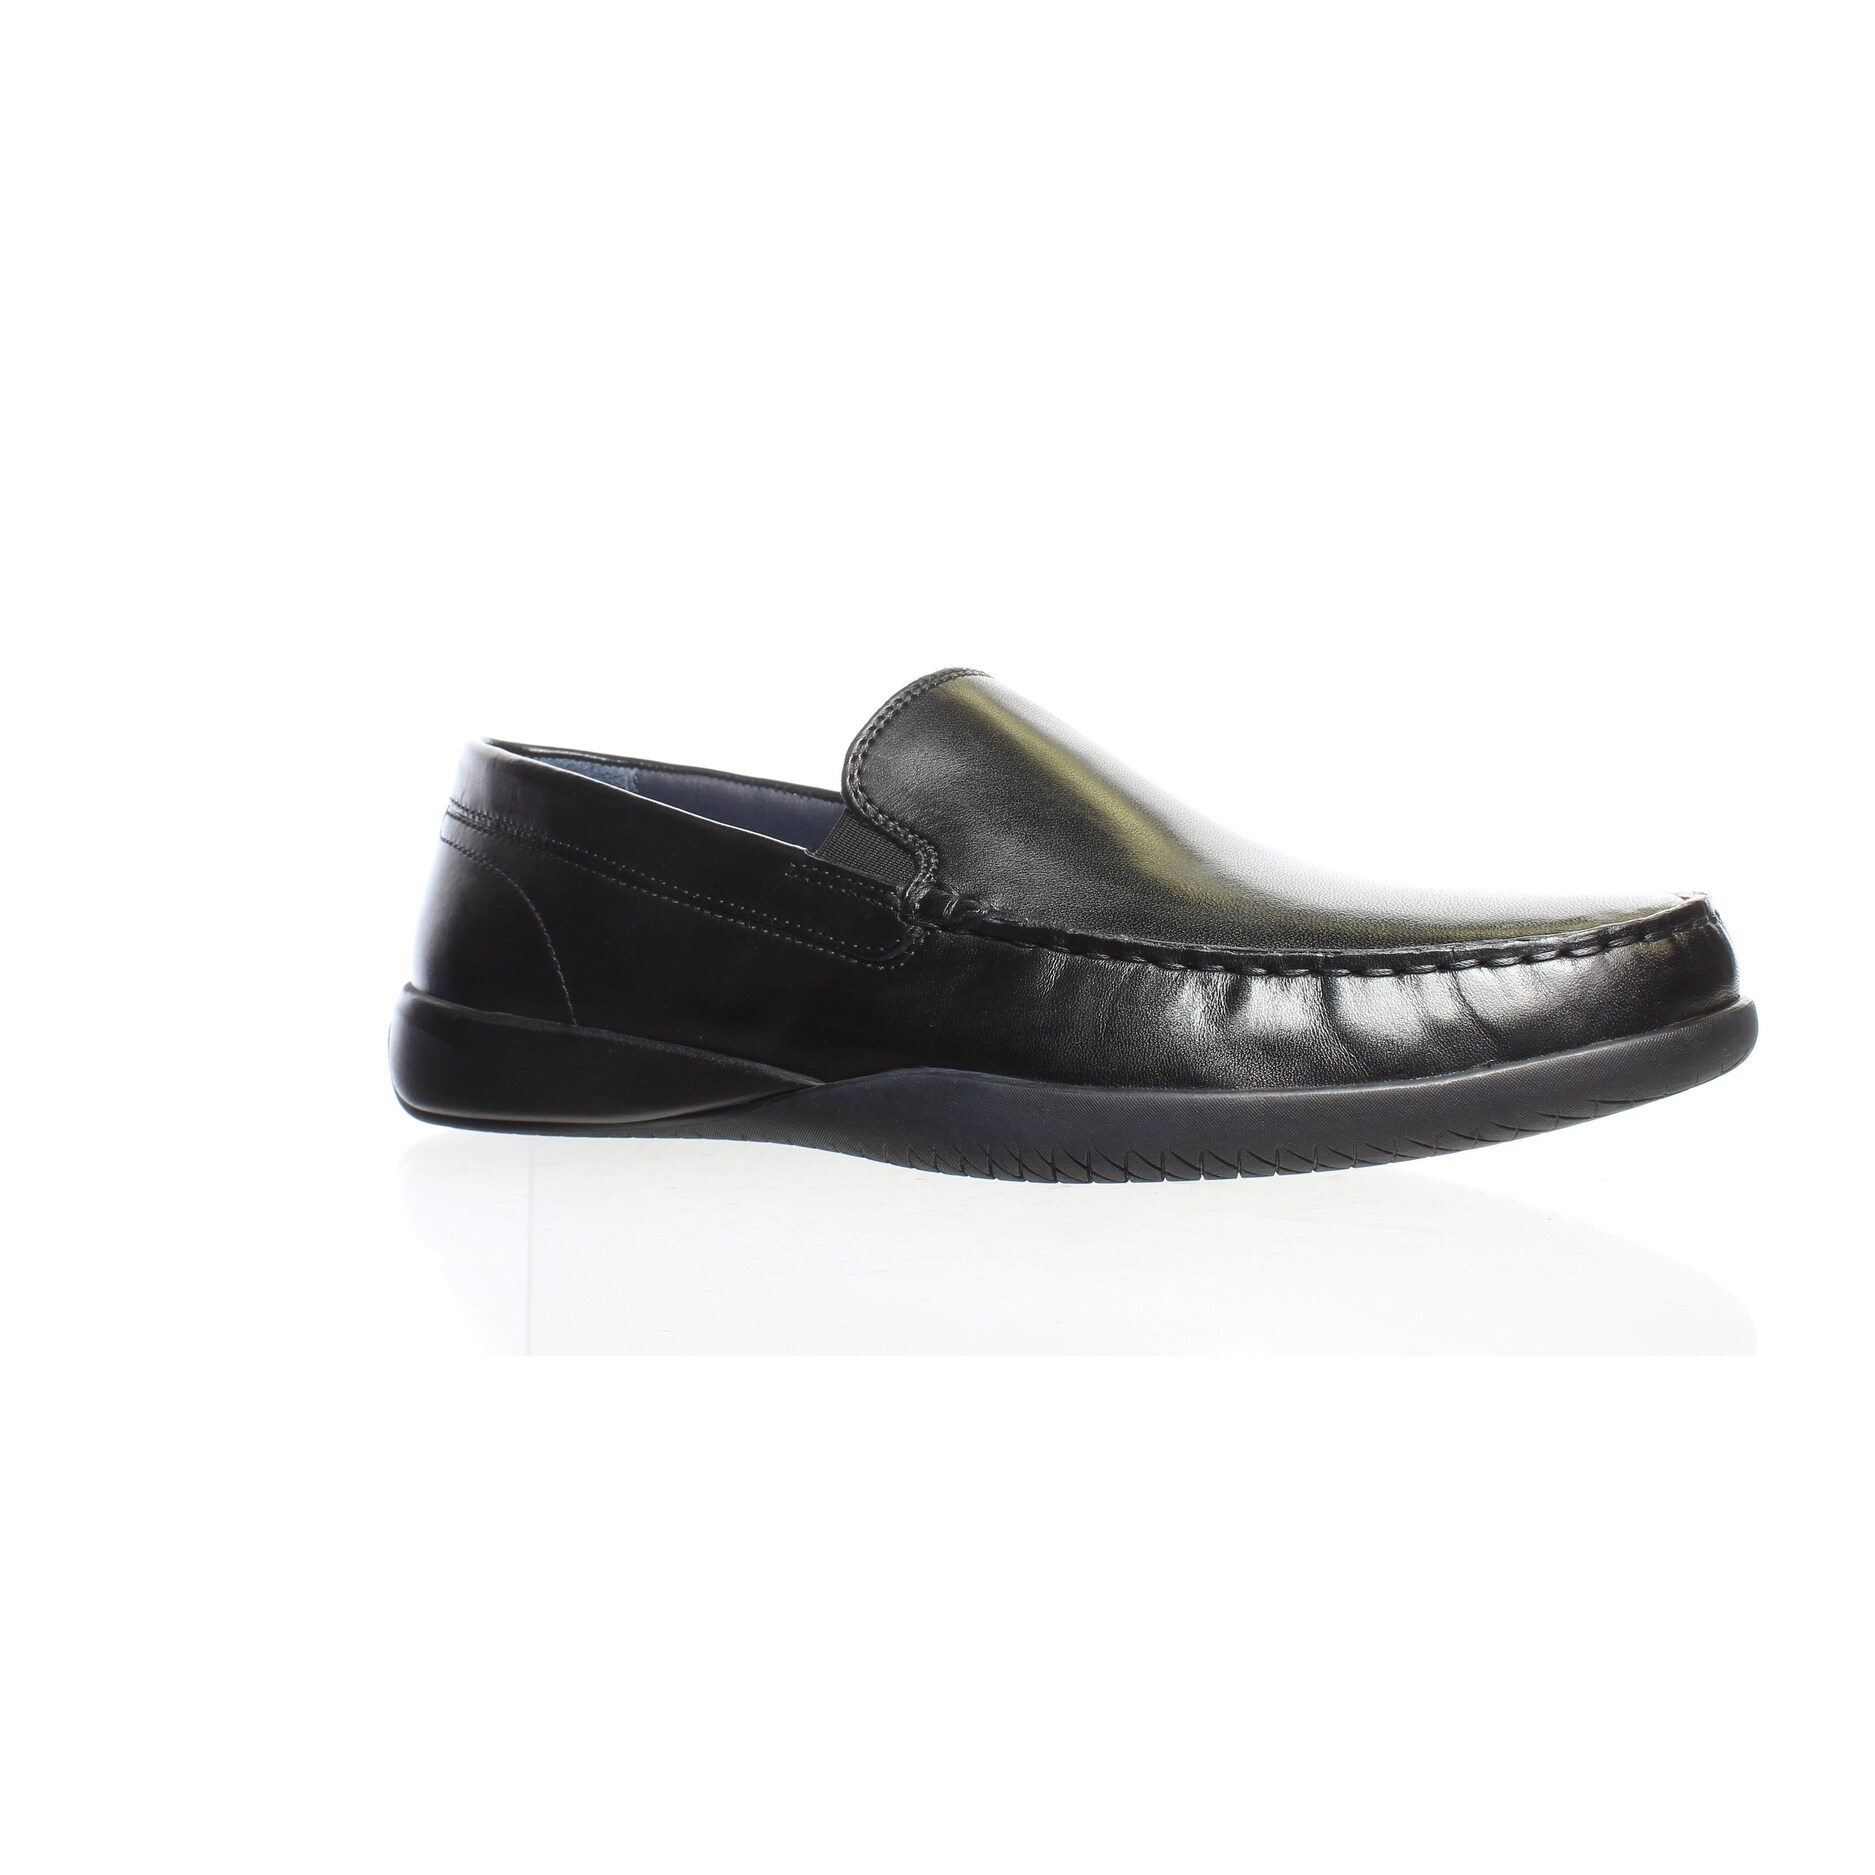 size 2 loafers